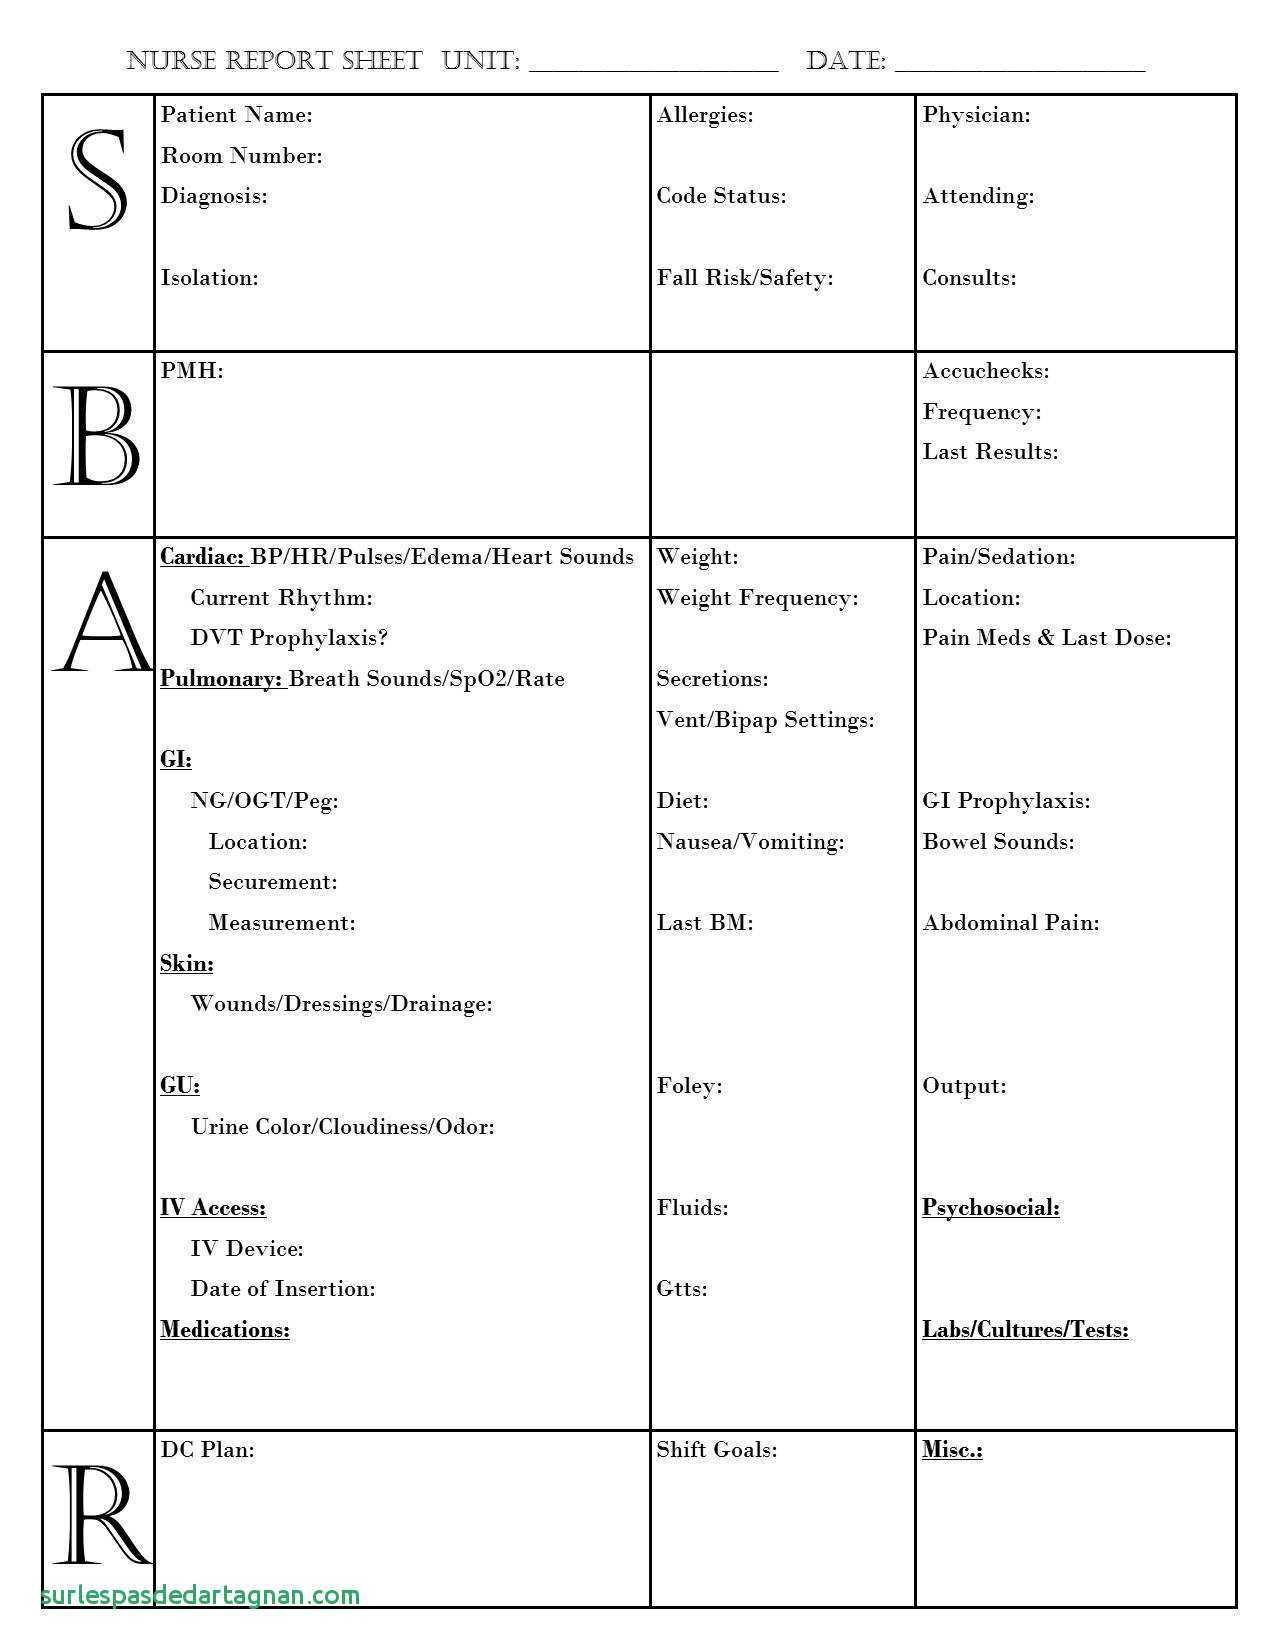 Nursing Report Sheet Template Together With Sbar Nurse In Nurse Report Sheet Templates